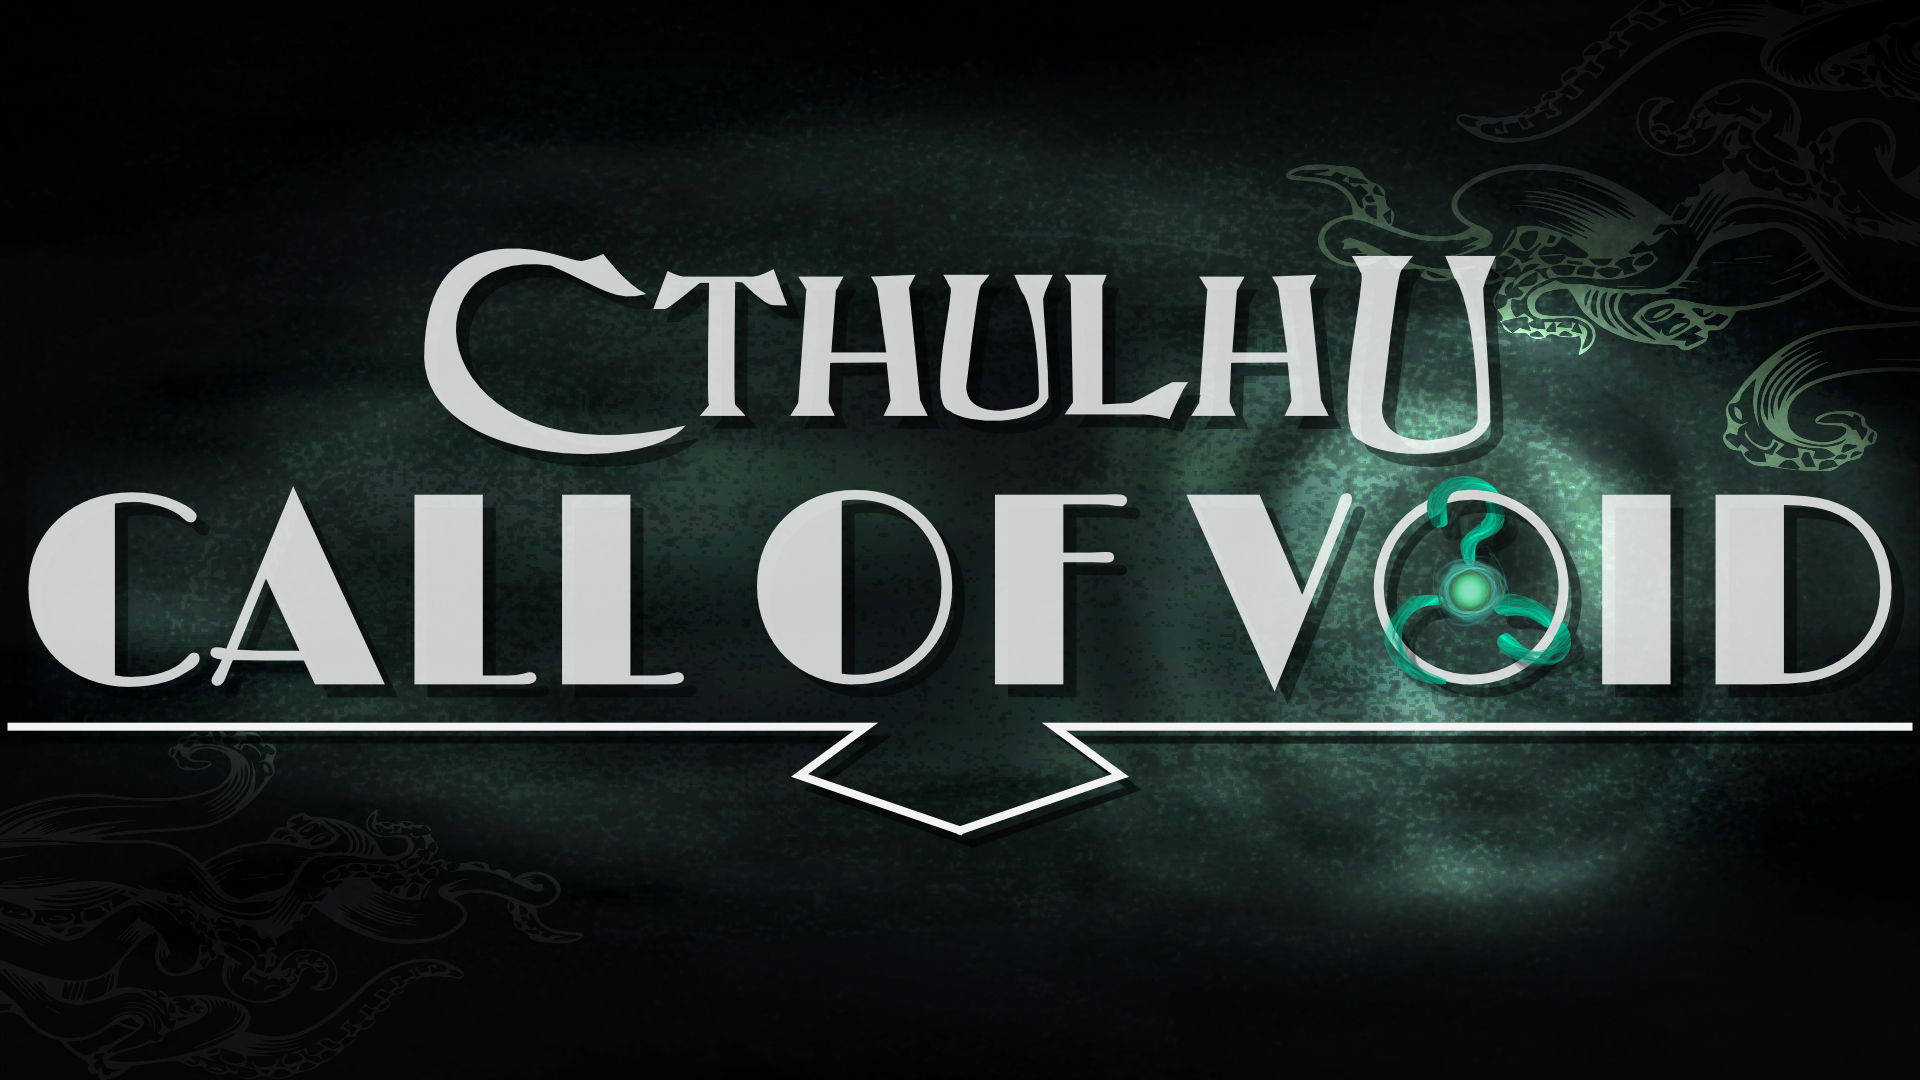 Cthulhu Call of void